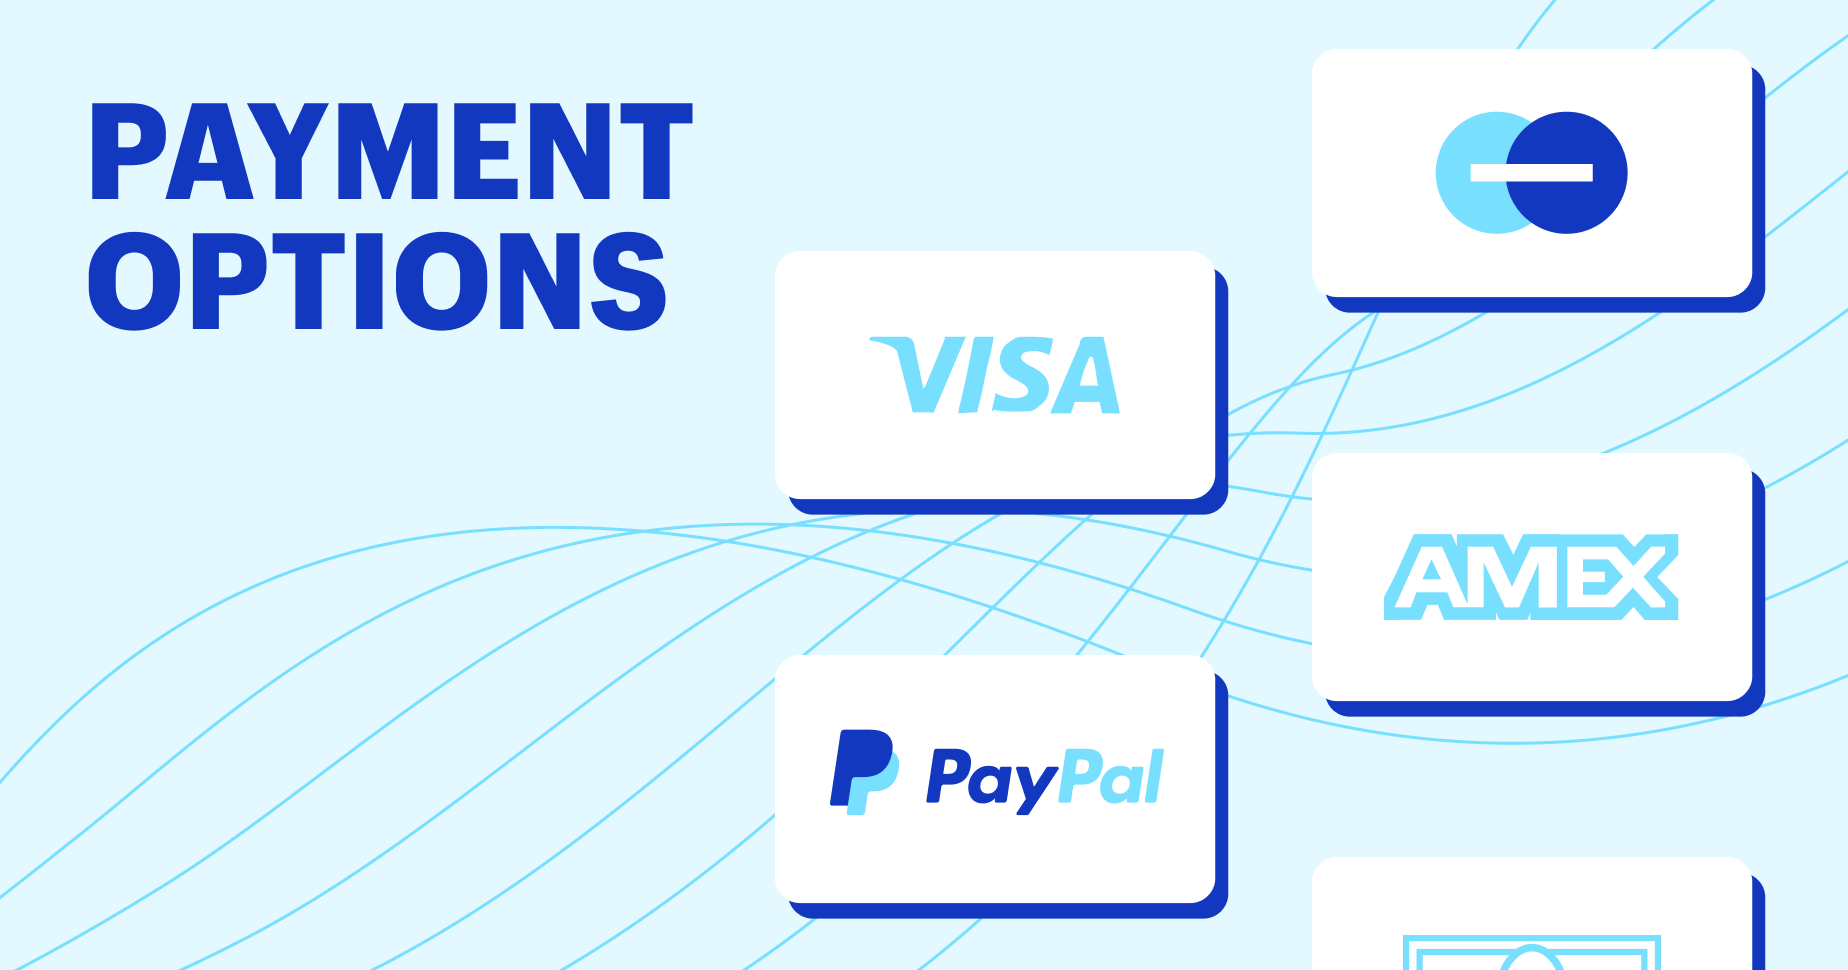 card shapes with branded names like Visa representing payment methods